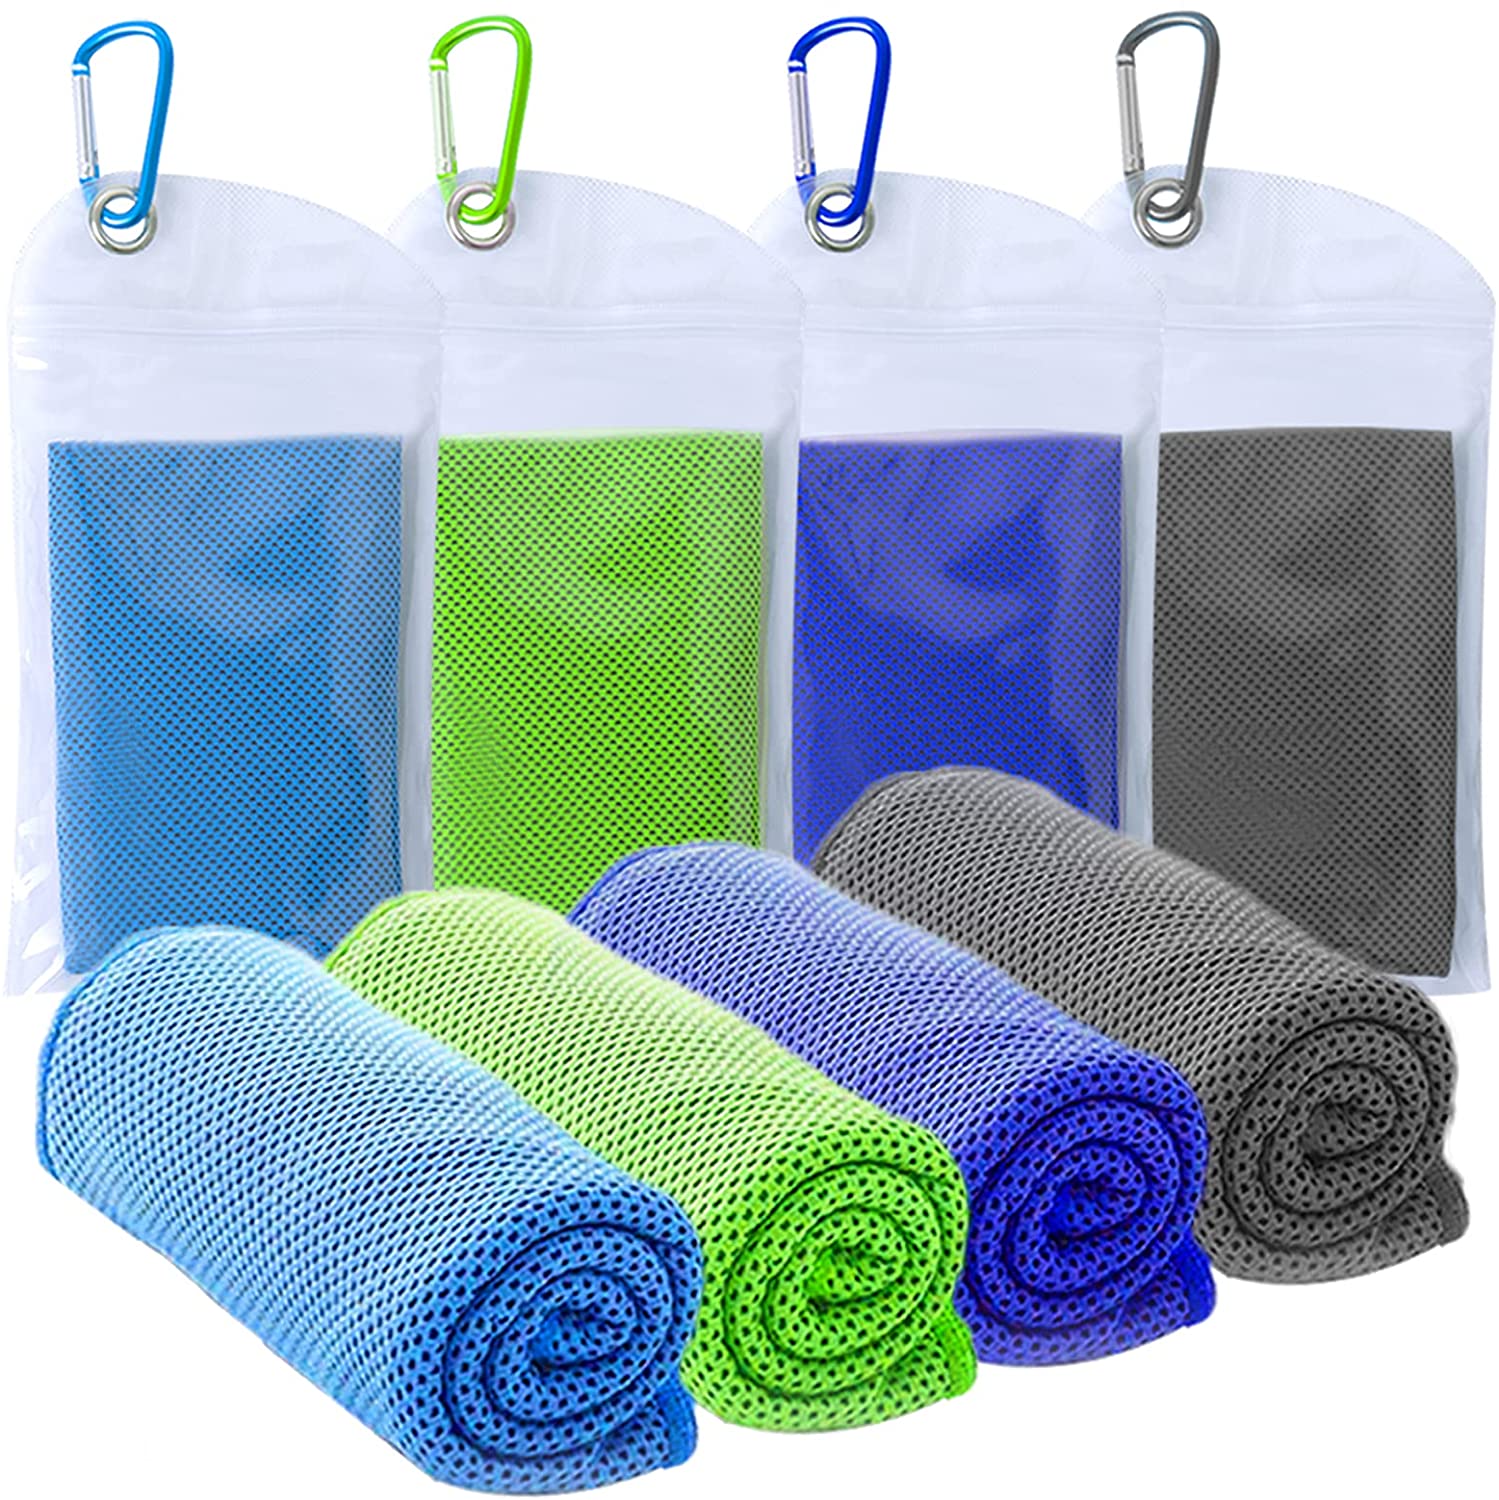 Microfiber Cooling Towels Sweat Towel Wristbands for Gym Workout